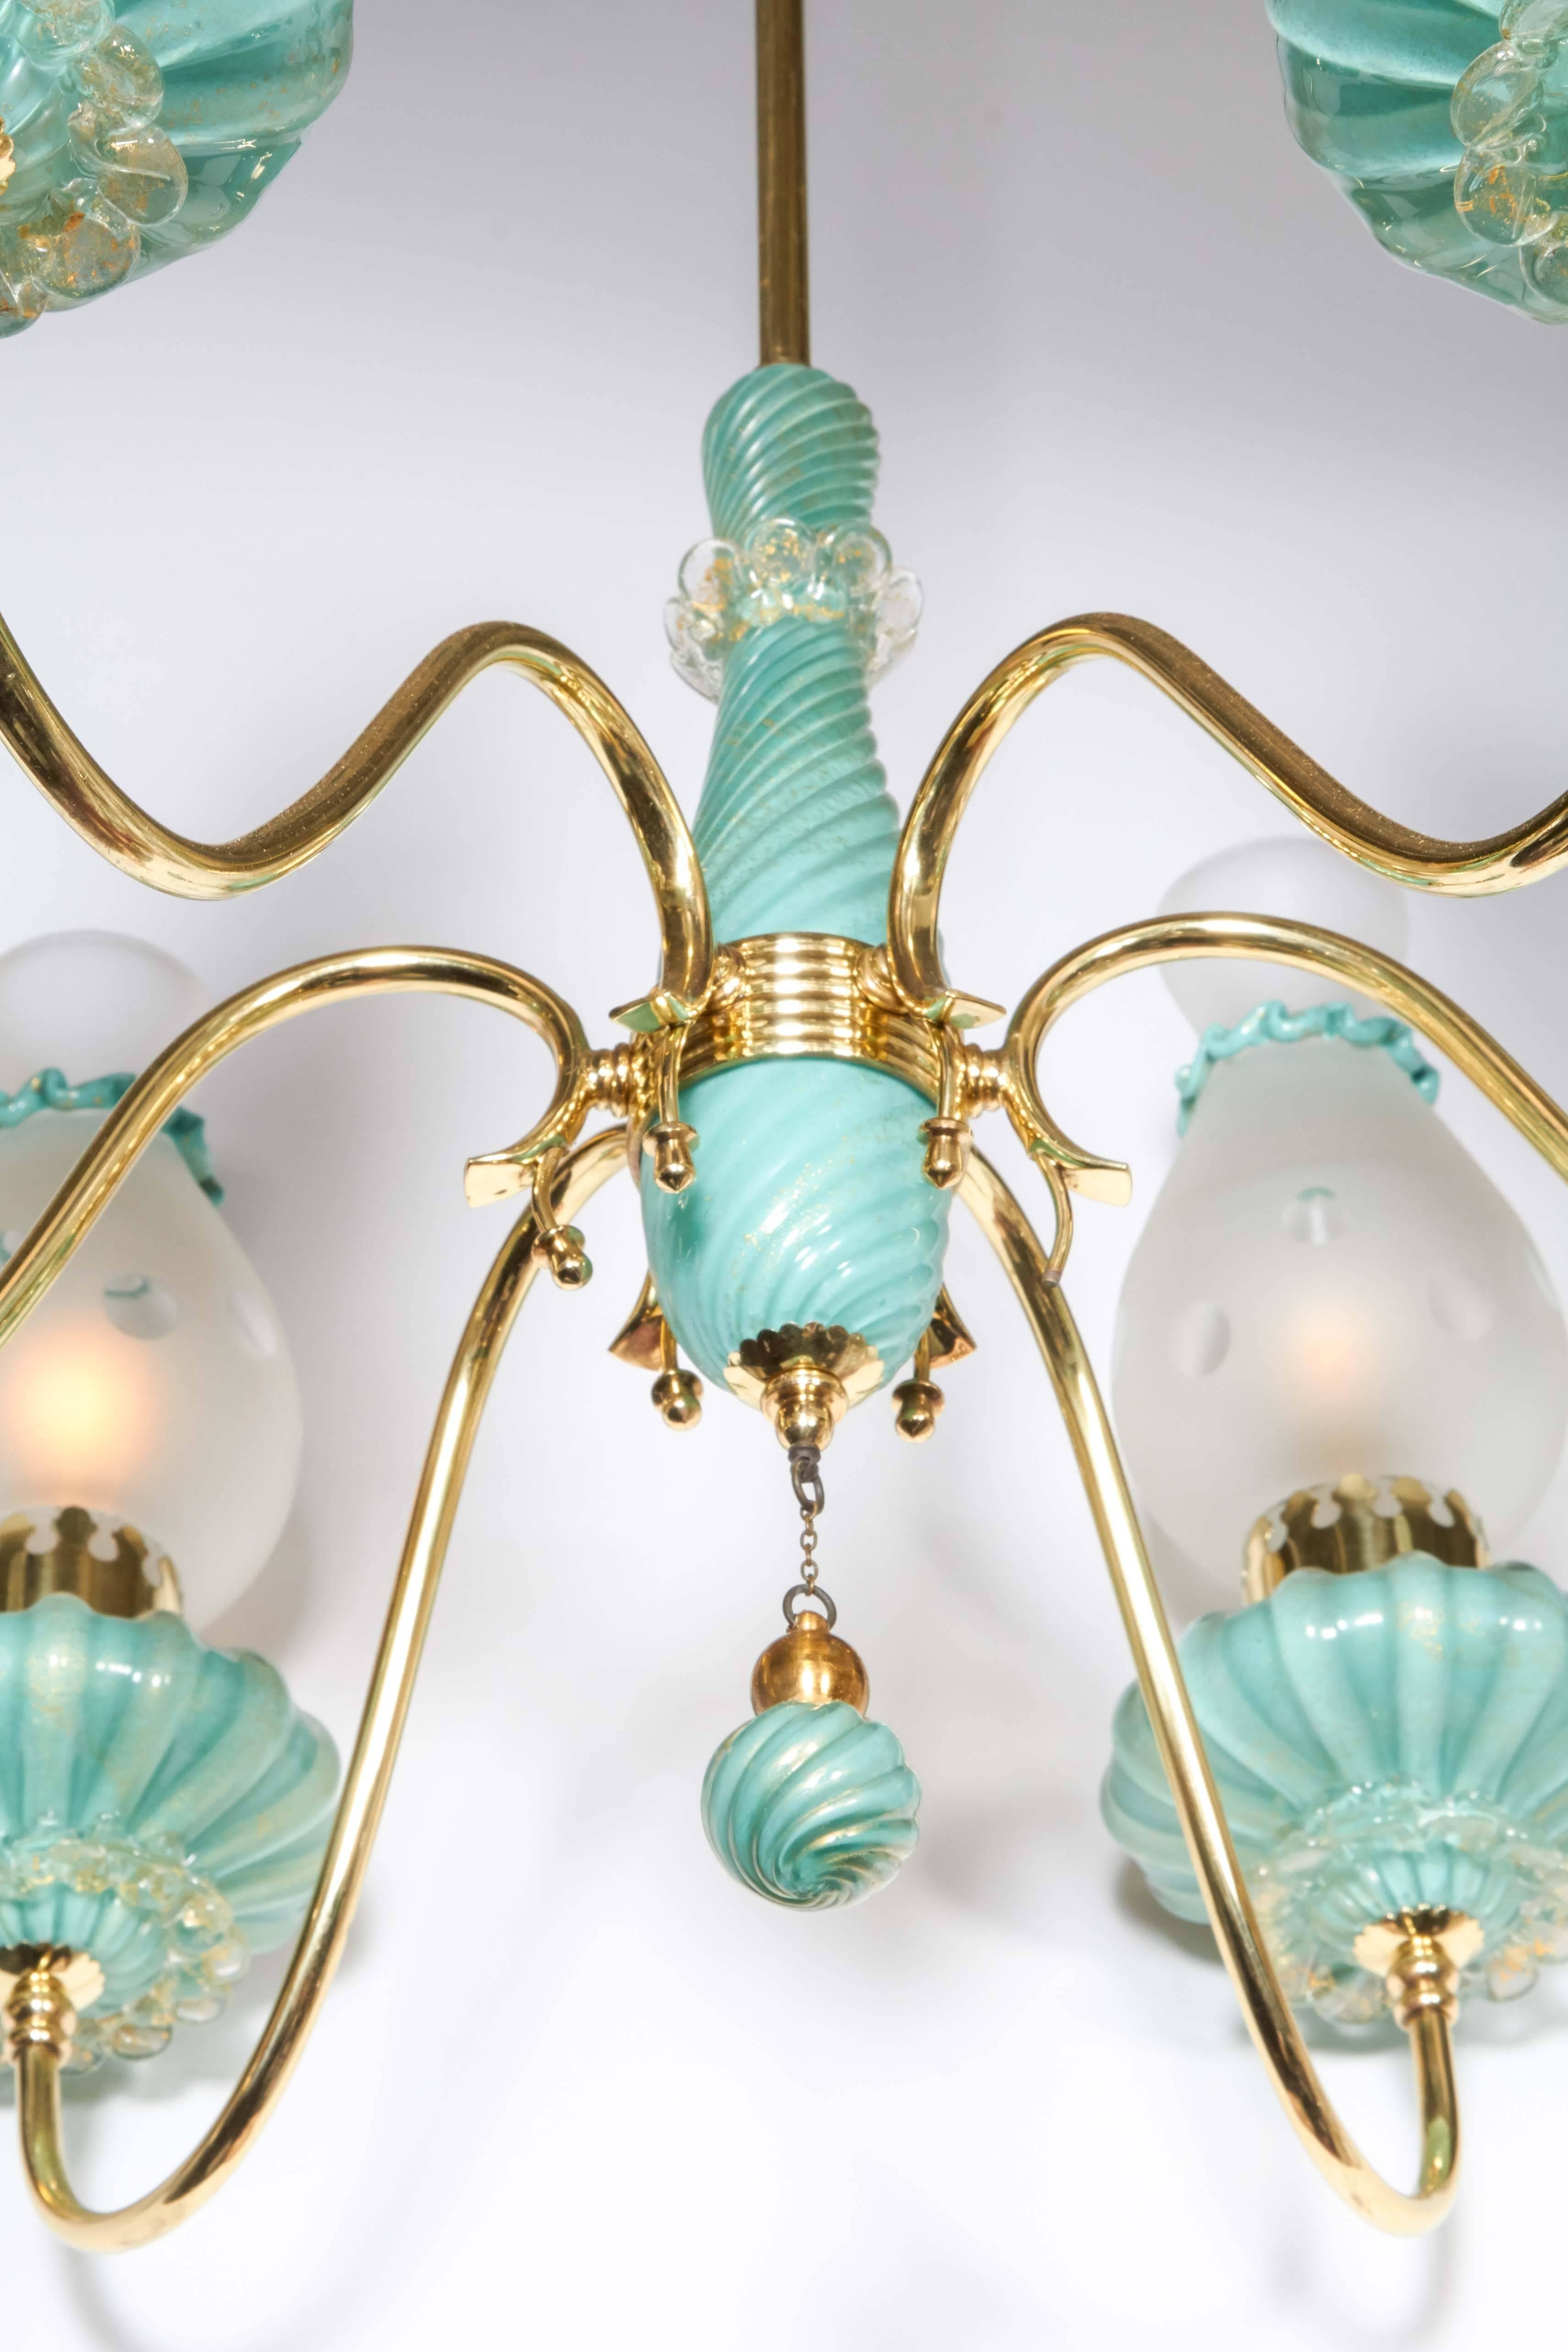 Attributed to Seguso Vetri d'Arte is this Italian 1950s six-arm chandelier. It has brass mounts with hand blown turquoise aventurine glass and hand blown with etched polka dot design frosted glass shades.
Glass attributed to Seguso Vetri